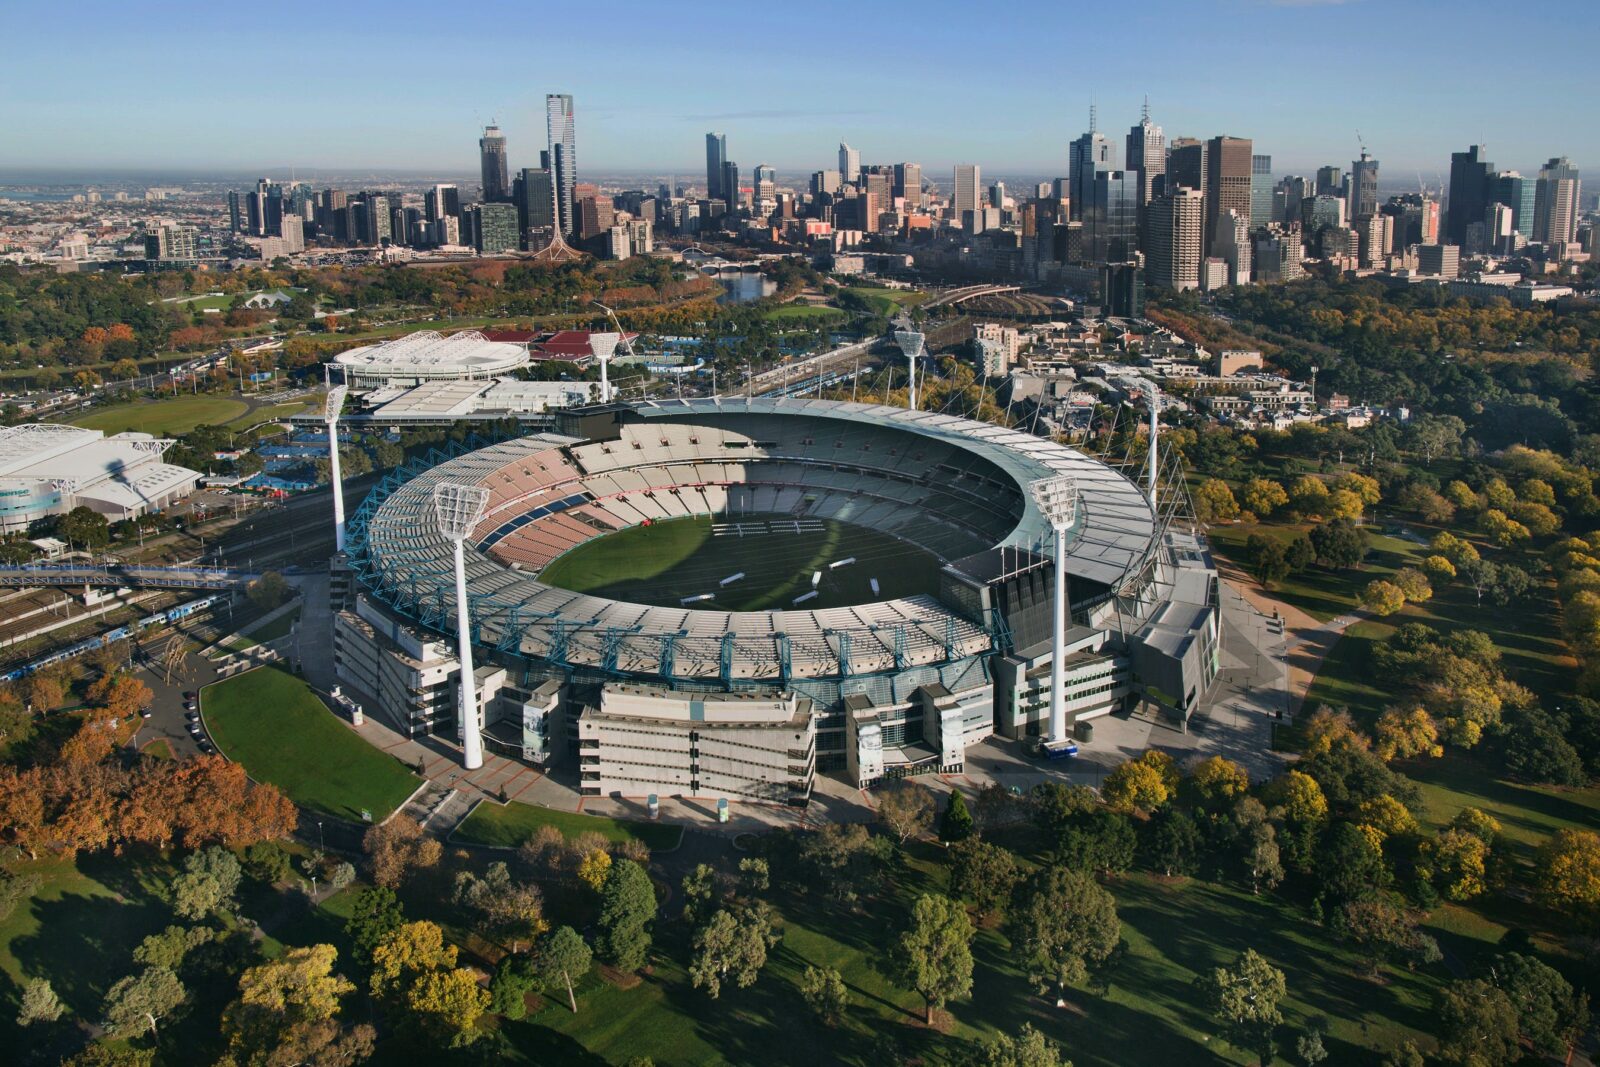 Image showing MCG and Yarra Park, location of the 2022 Toyota AFL Grand Final